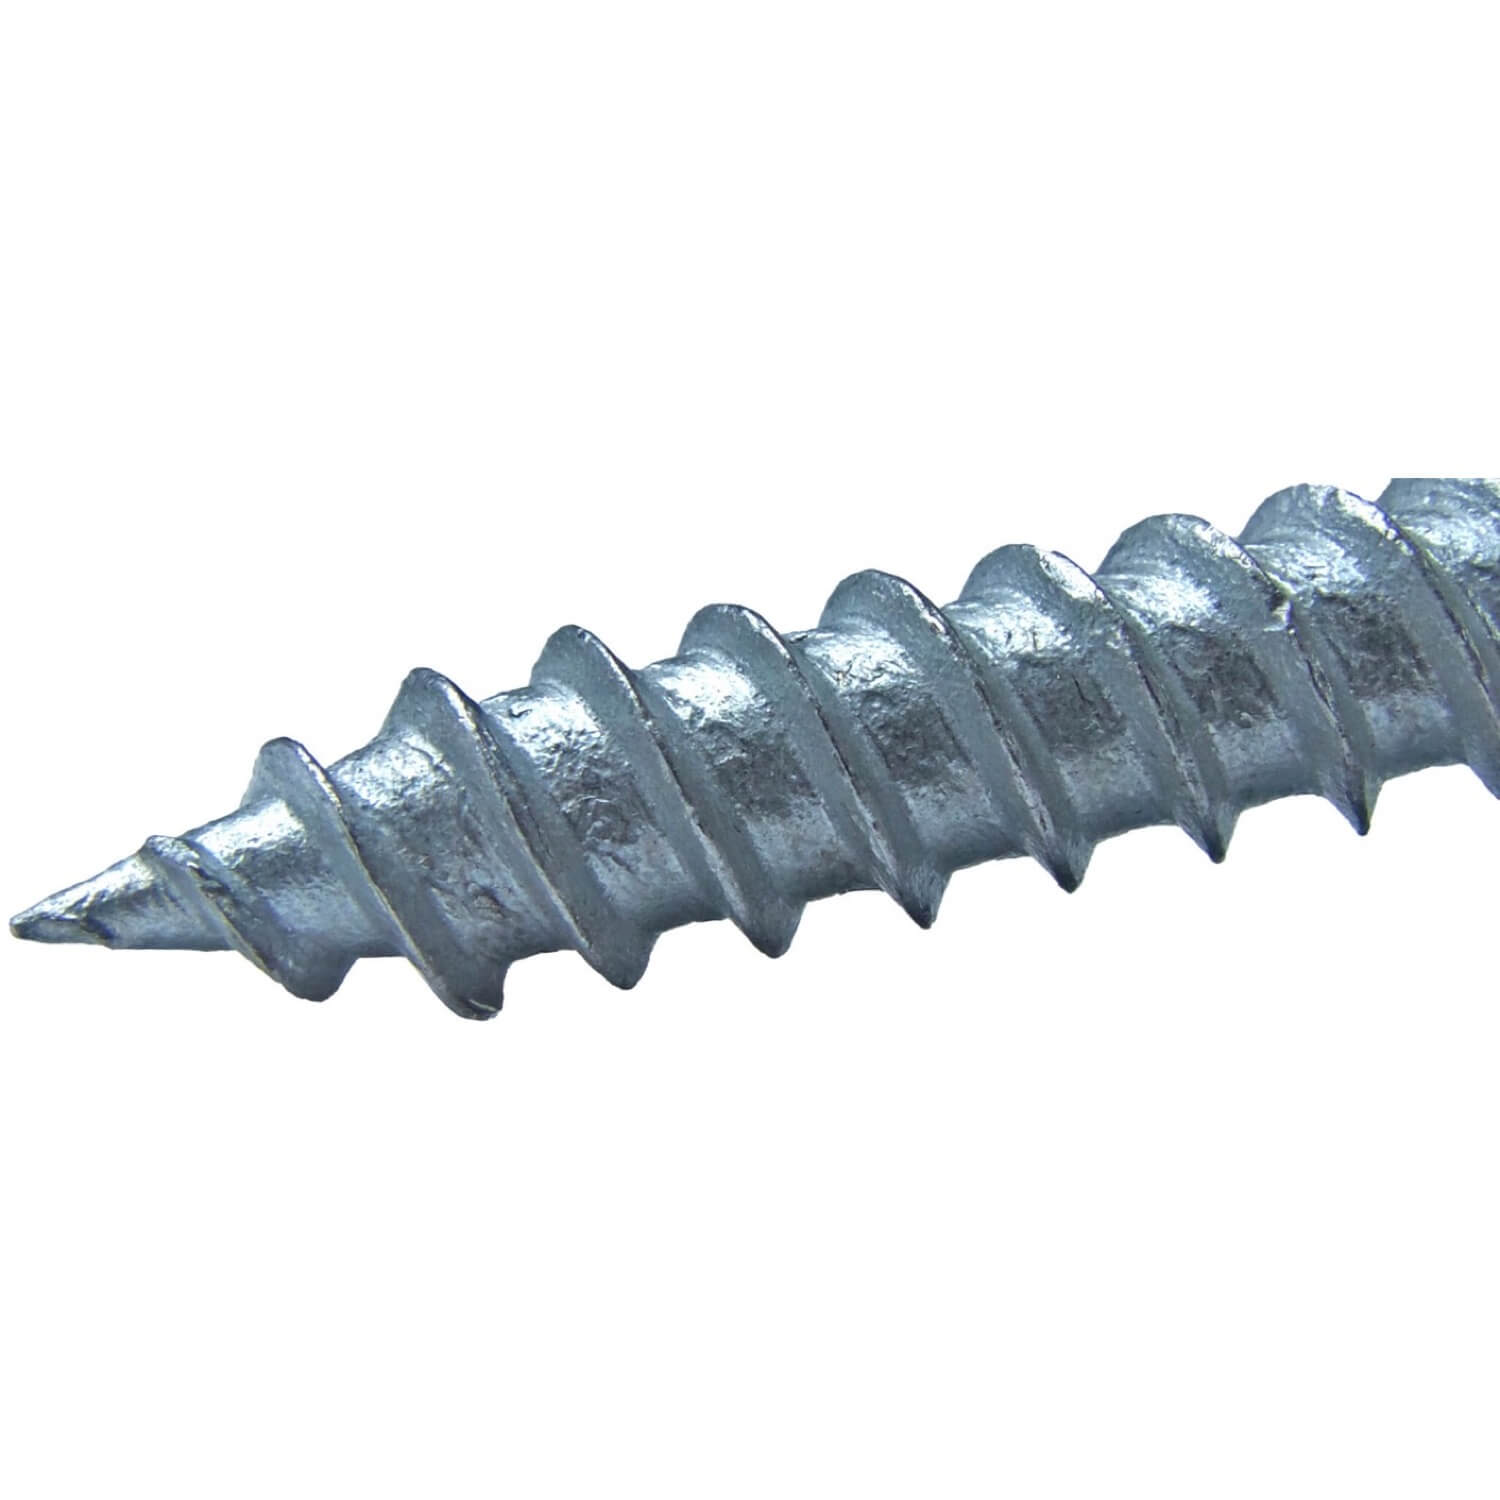 50 2" 50mm CORRUGATED ROOFING SCREWS & GREY STRAP CAPS FOR SHEET ROOFING * 